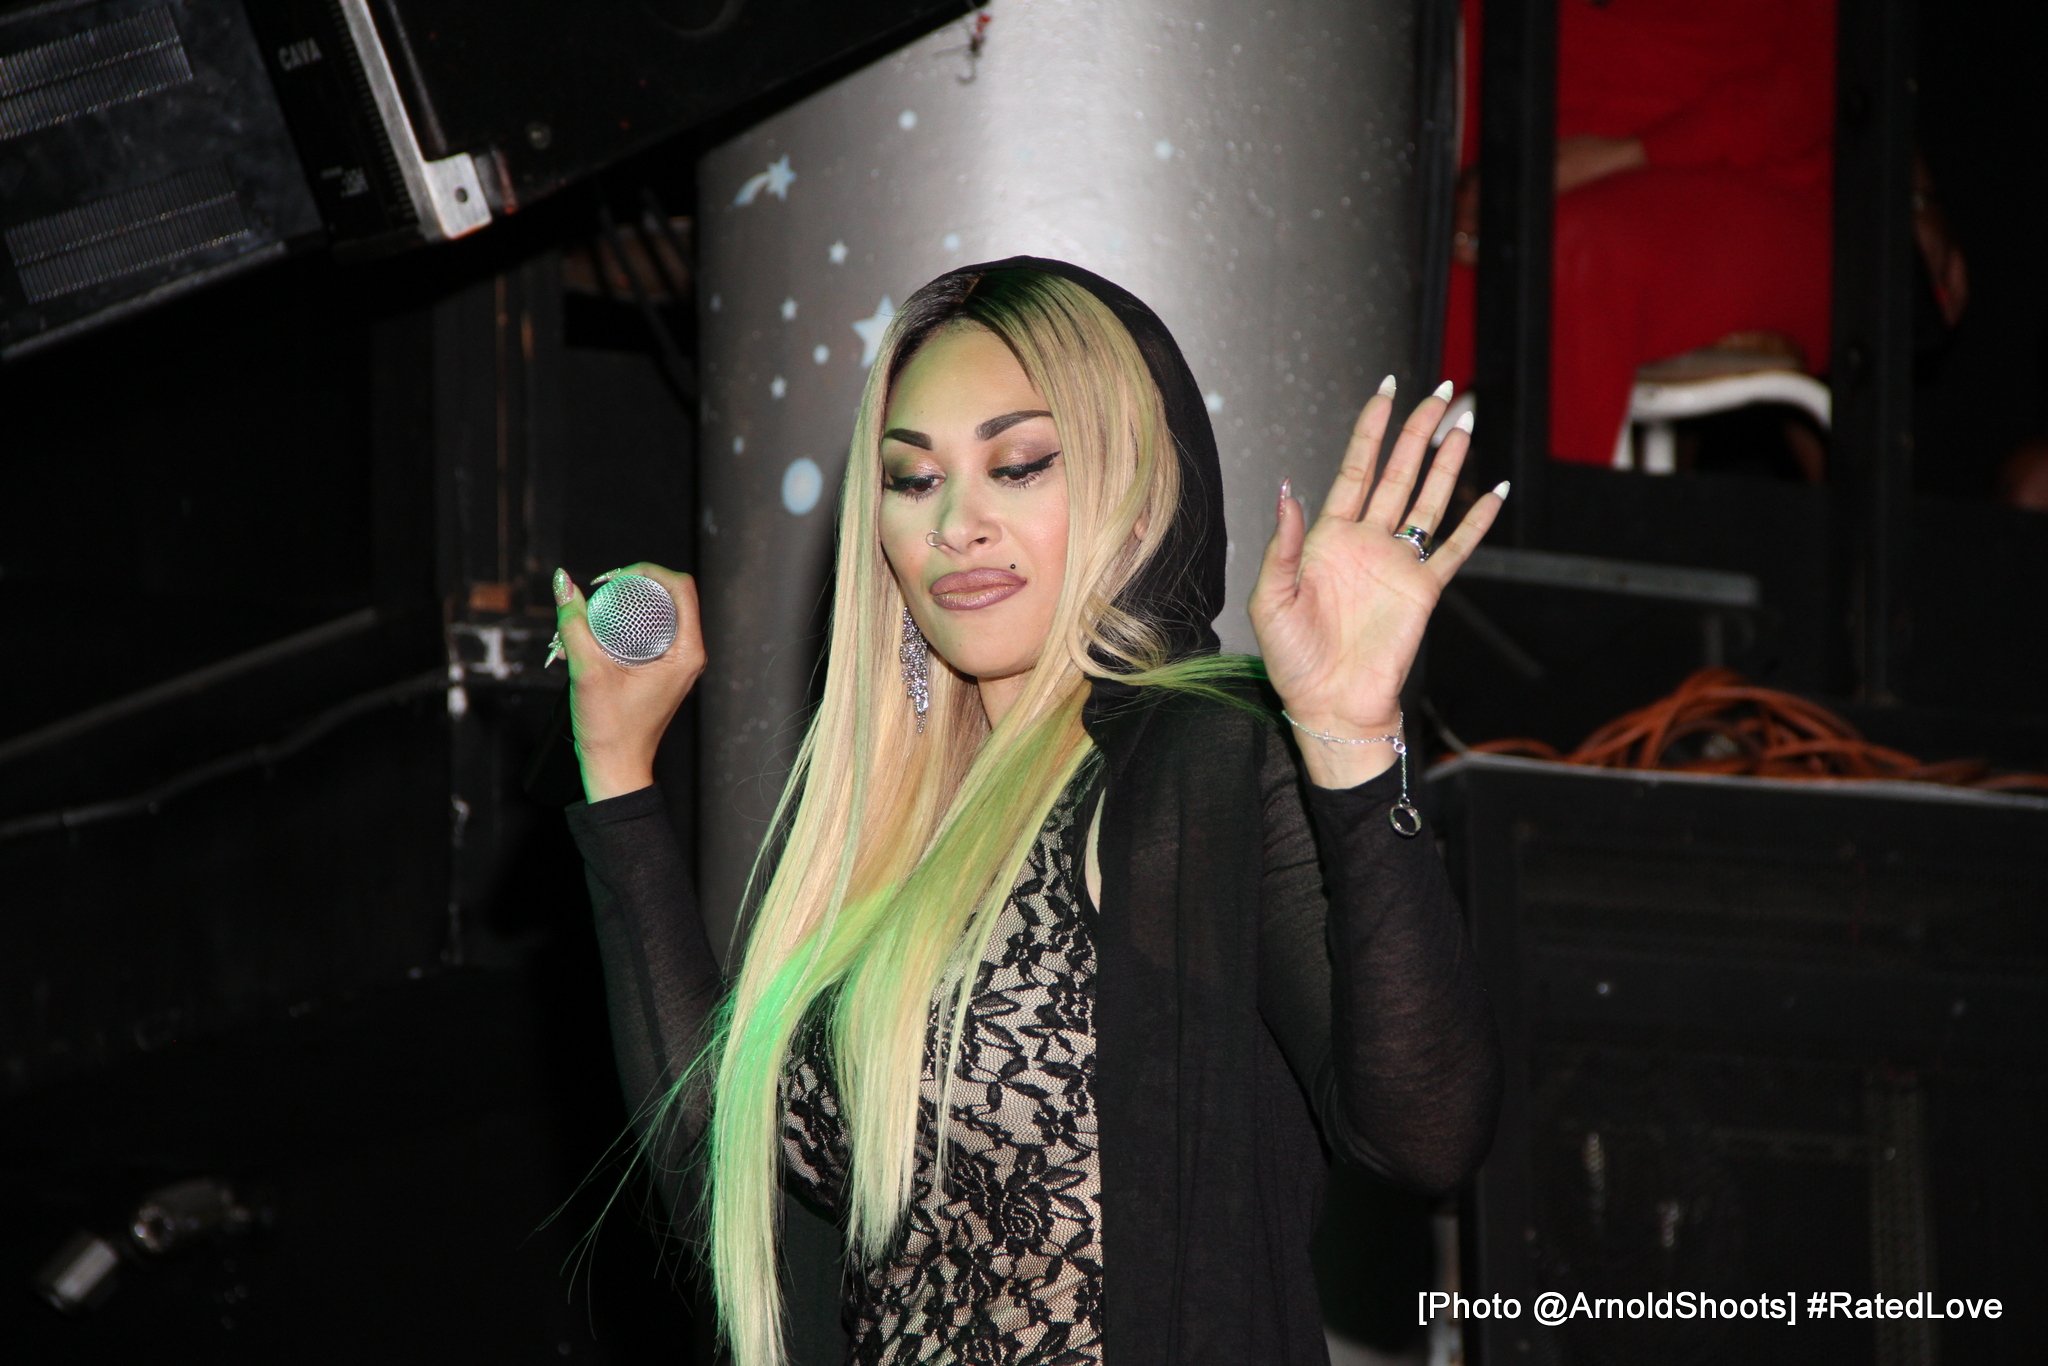 KeKe Wyatt’s ‘Rated Love’ Album Release Party In L.A.